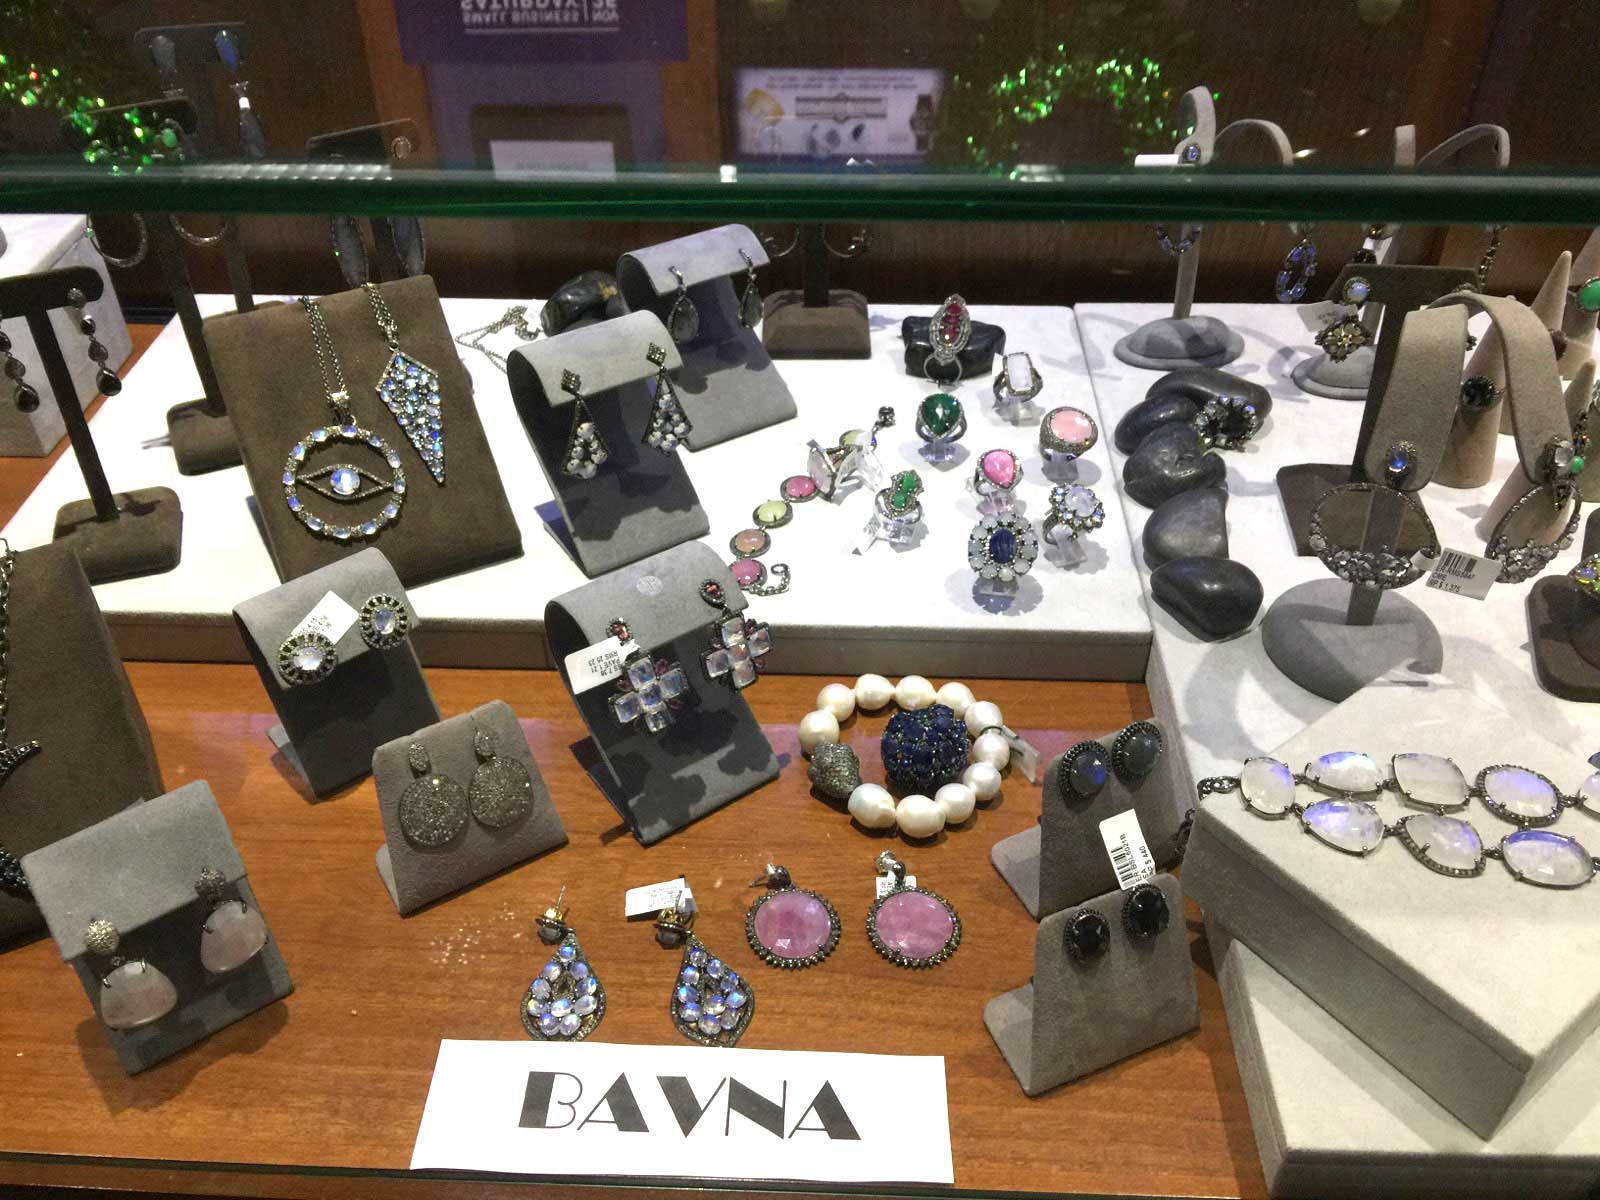 Bavna Jewlery Line at East Towne Jewelers in Mequon WI